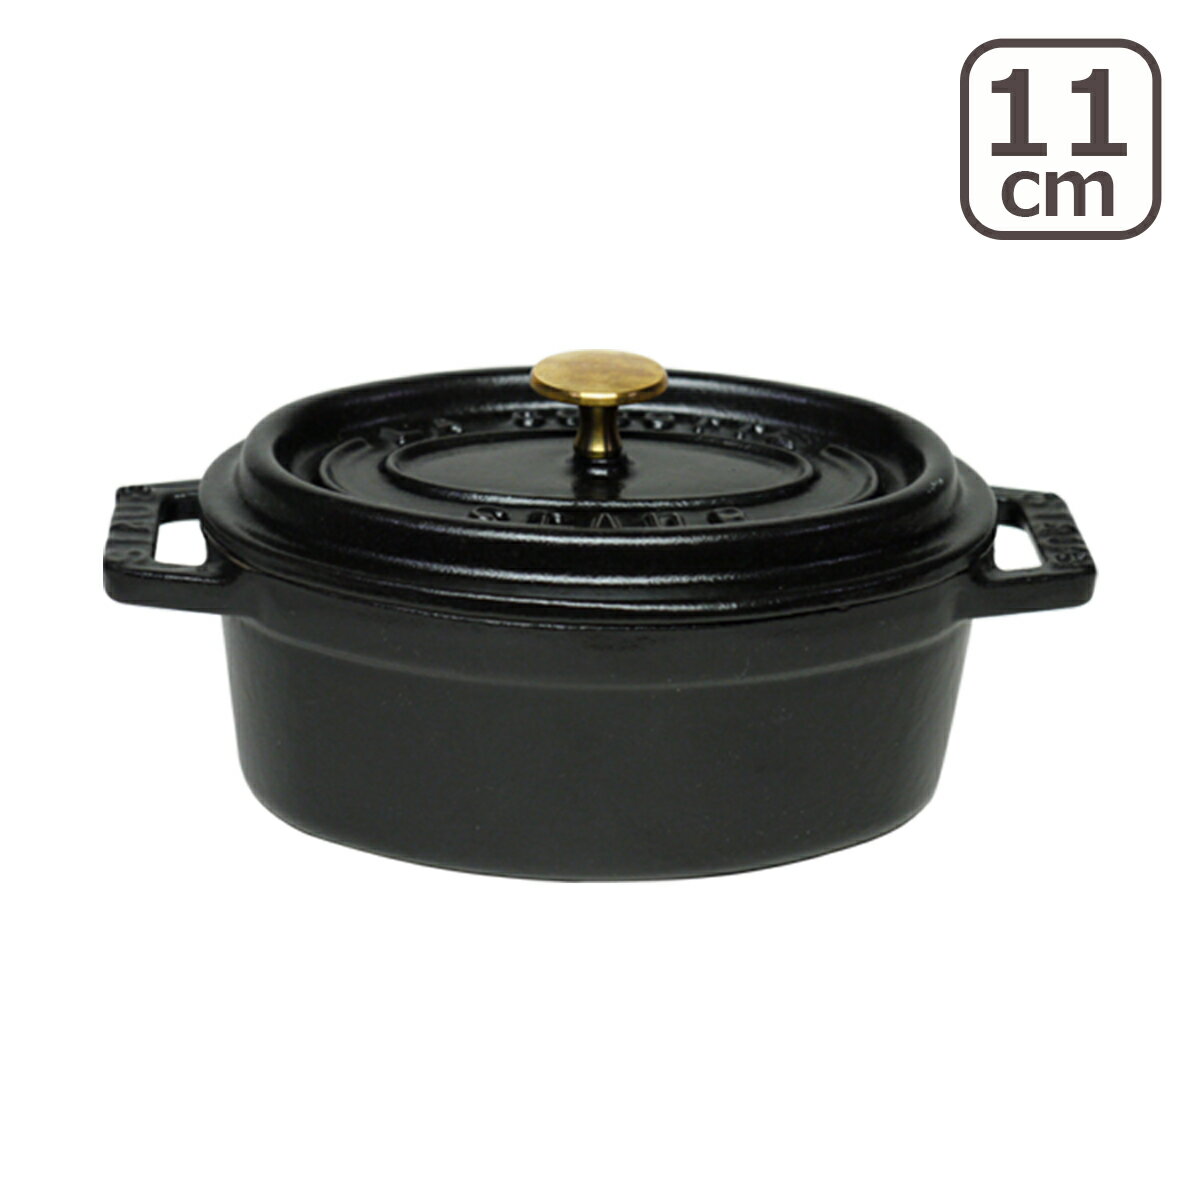 ȥ  STAUB ԥ å Х 11cm ֥å ۡ IHб COCOTTE OVAL stb1101 1...